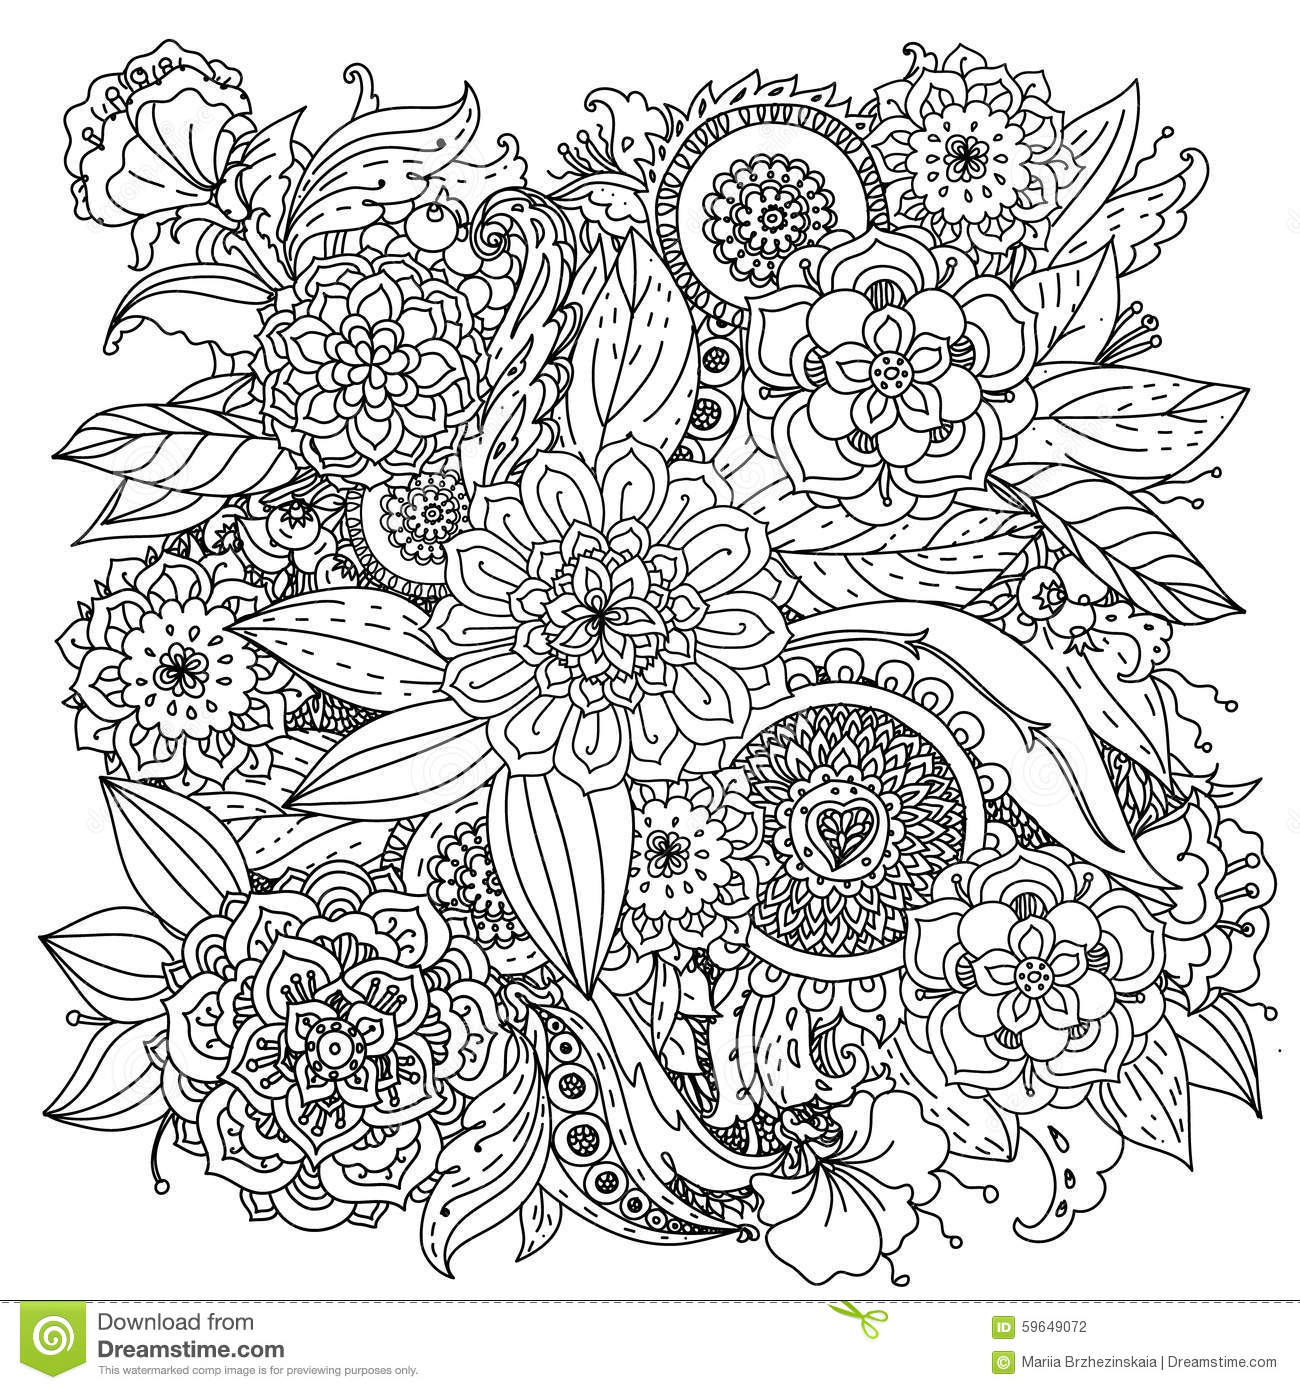 Coloring Pages ~ Free Printable Coloring Books Pdf Downloads Doodle - Free Printable Doodle Patterns